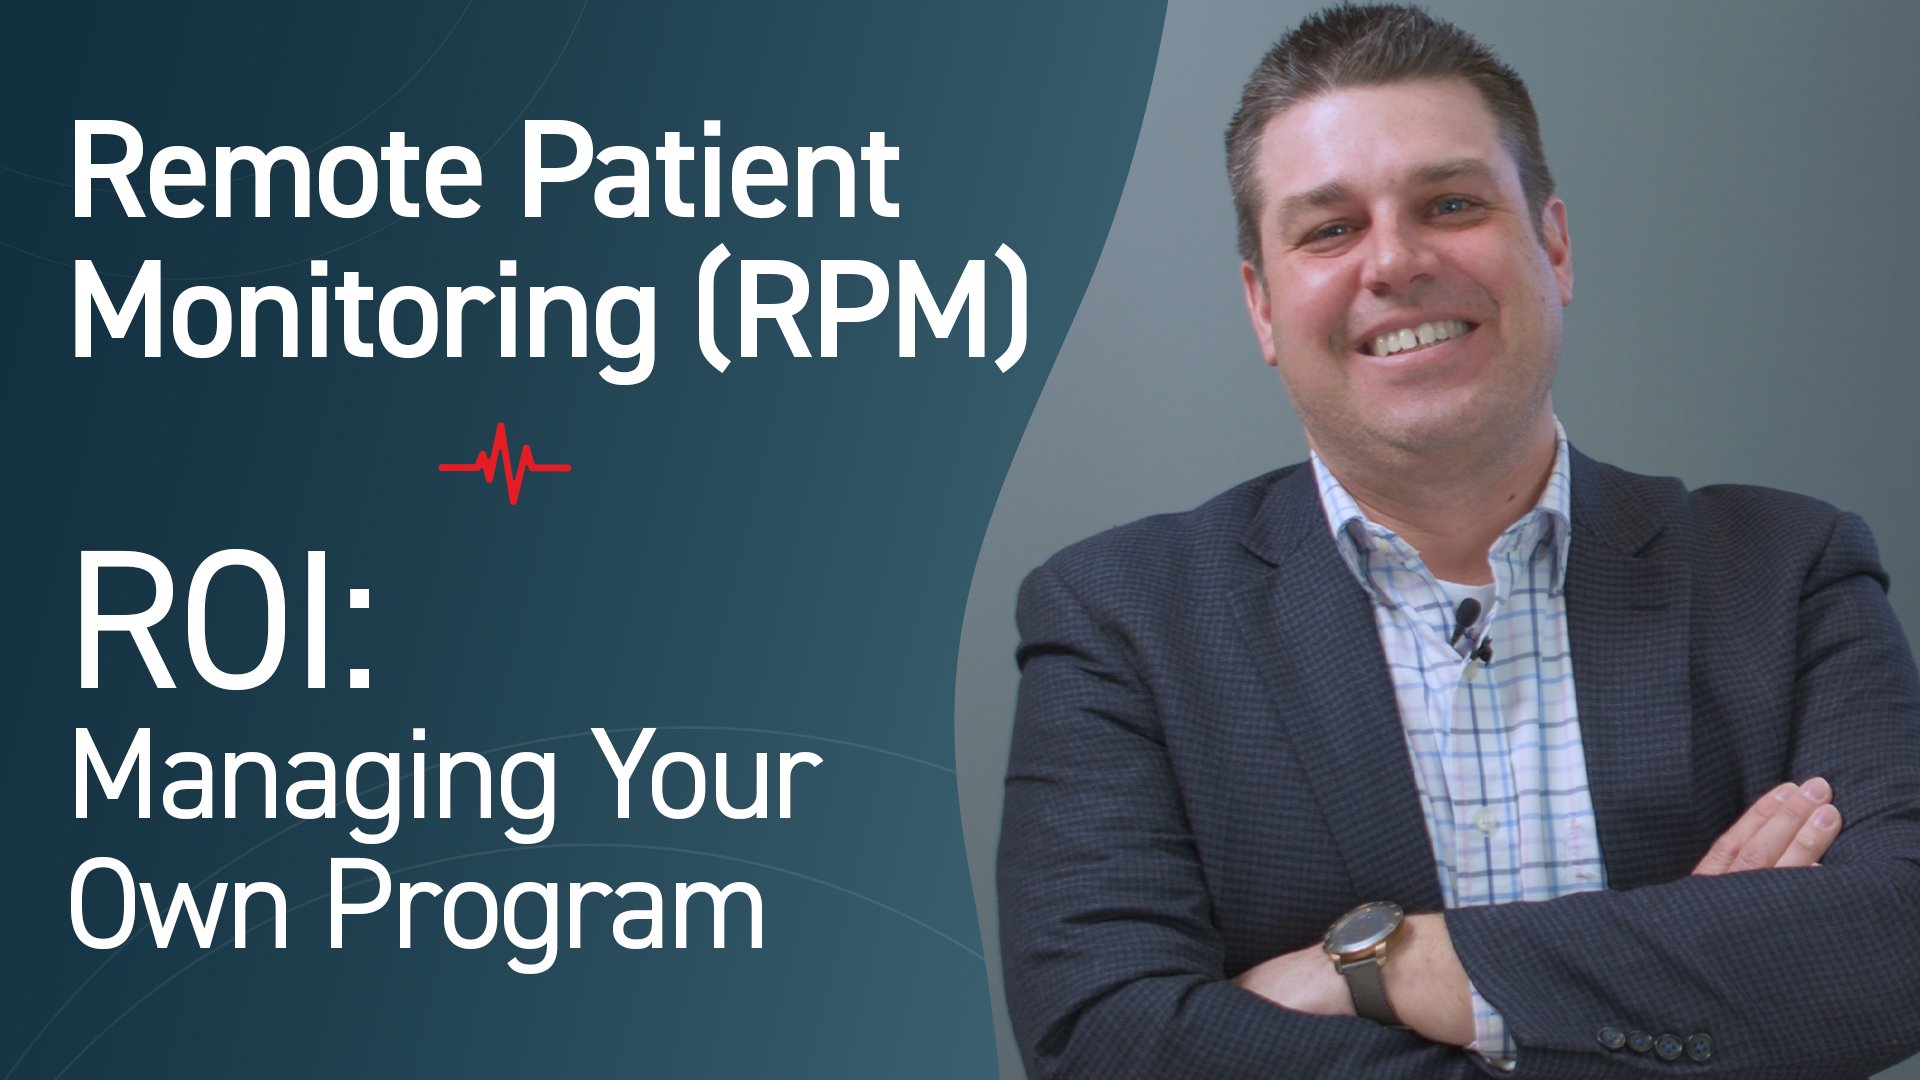 What is the ROI of a Remote Patient Monitoring Program?